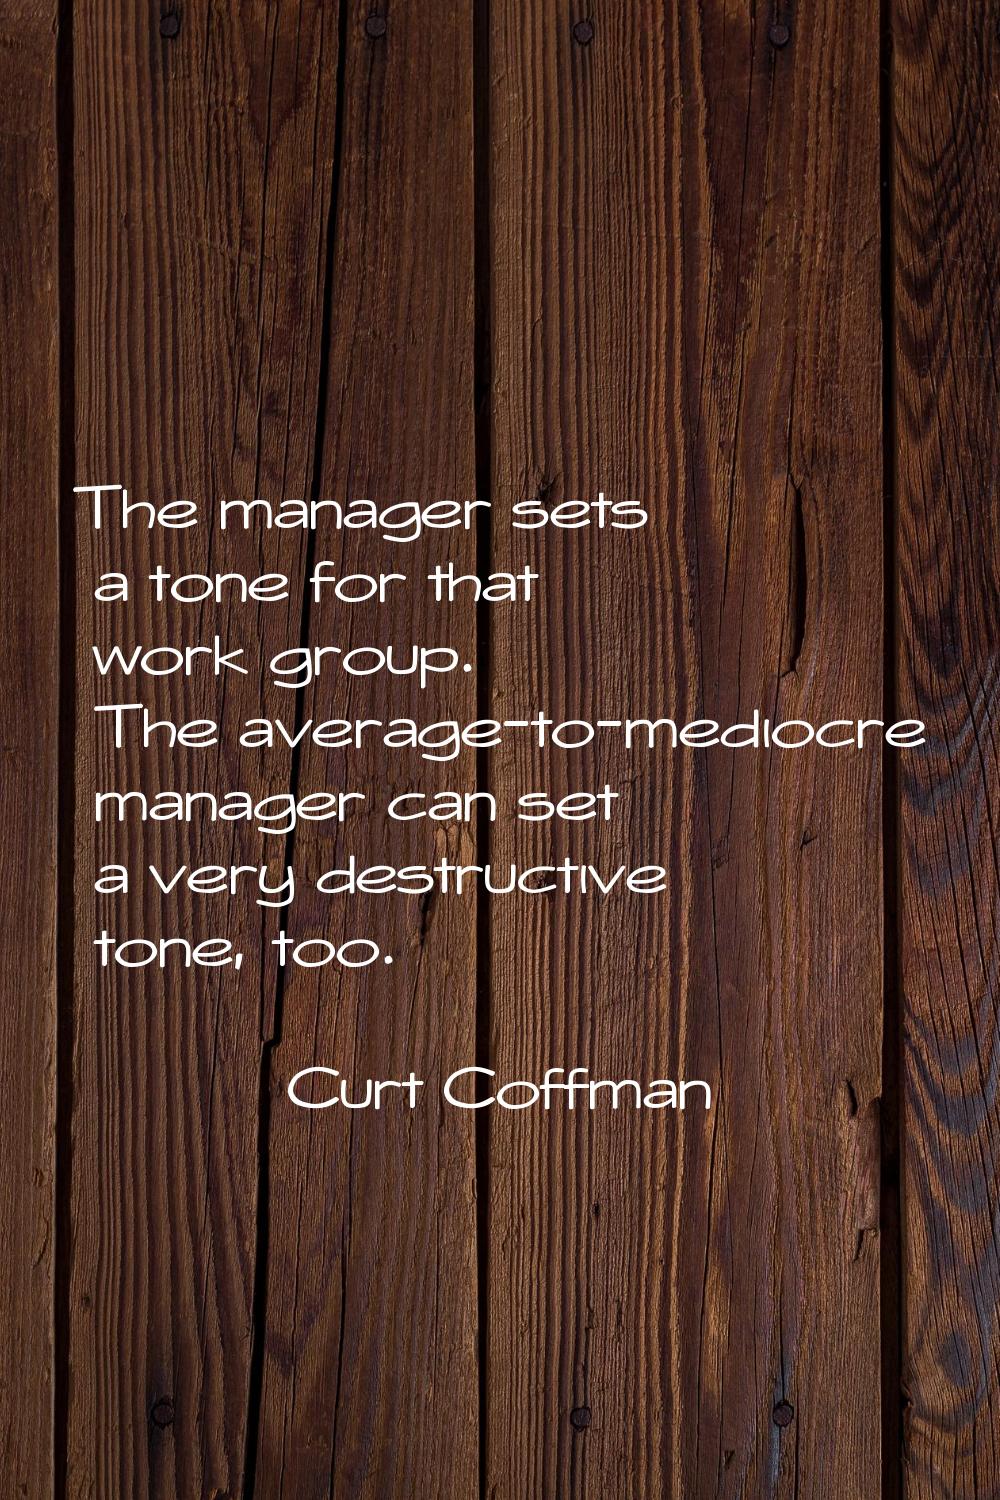 The manager sets a tone for that work group. The average-to-mediocre manager can set a very destruc